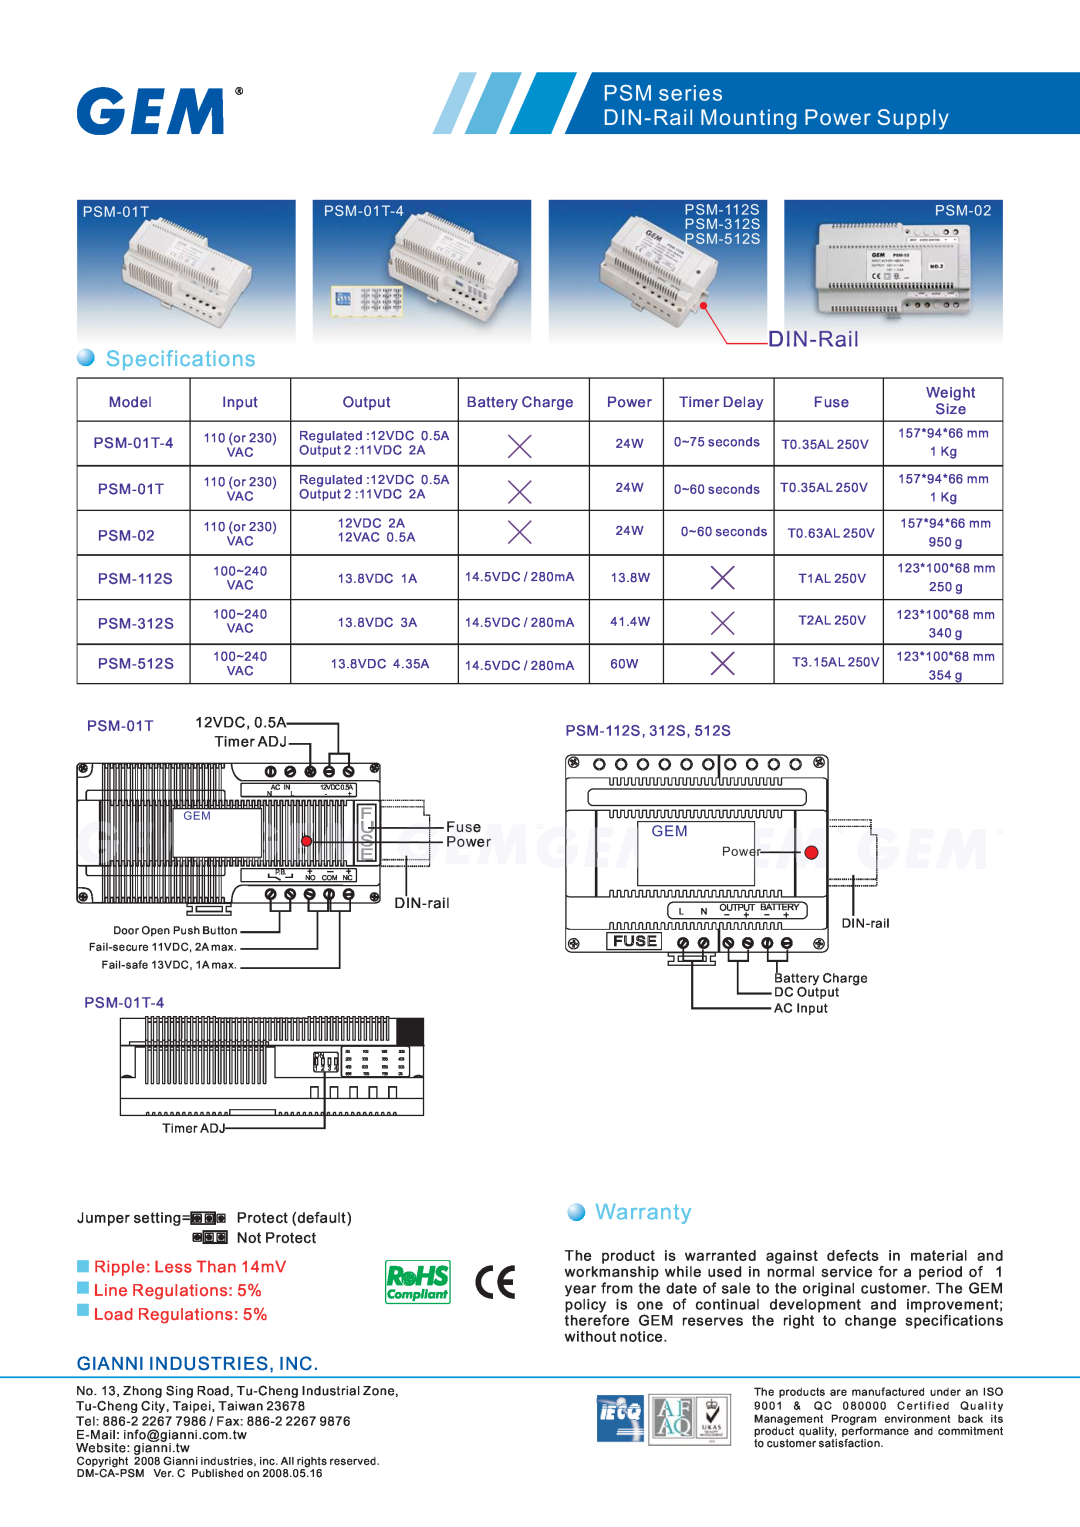 Gianni Industries PSM-112S warranty PSM series DIN-Rail Mounting Power Supply, Specifications, Warranty, 12VDC, 0.5A 